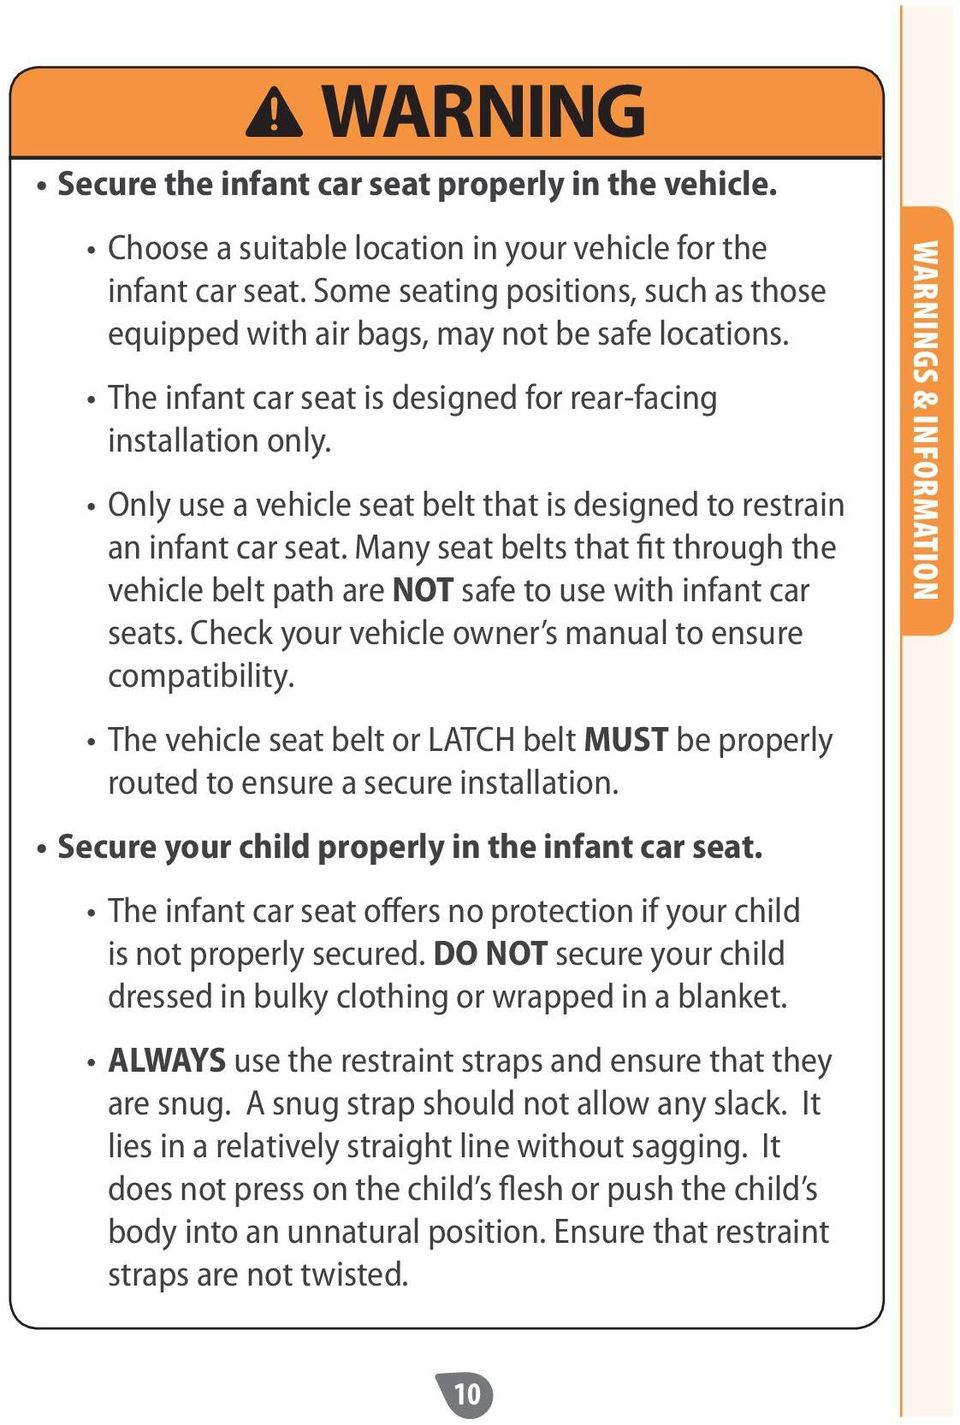 Only use a vehicle seat belt that is designed to restrain an infant car seat. Many seat belts that fit through the vehicle belt path are NOT safe to use with infant car seats.